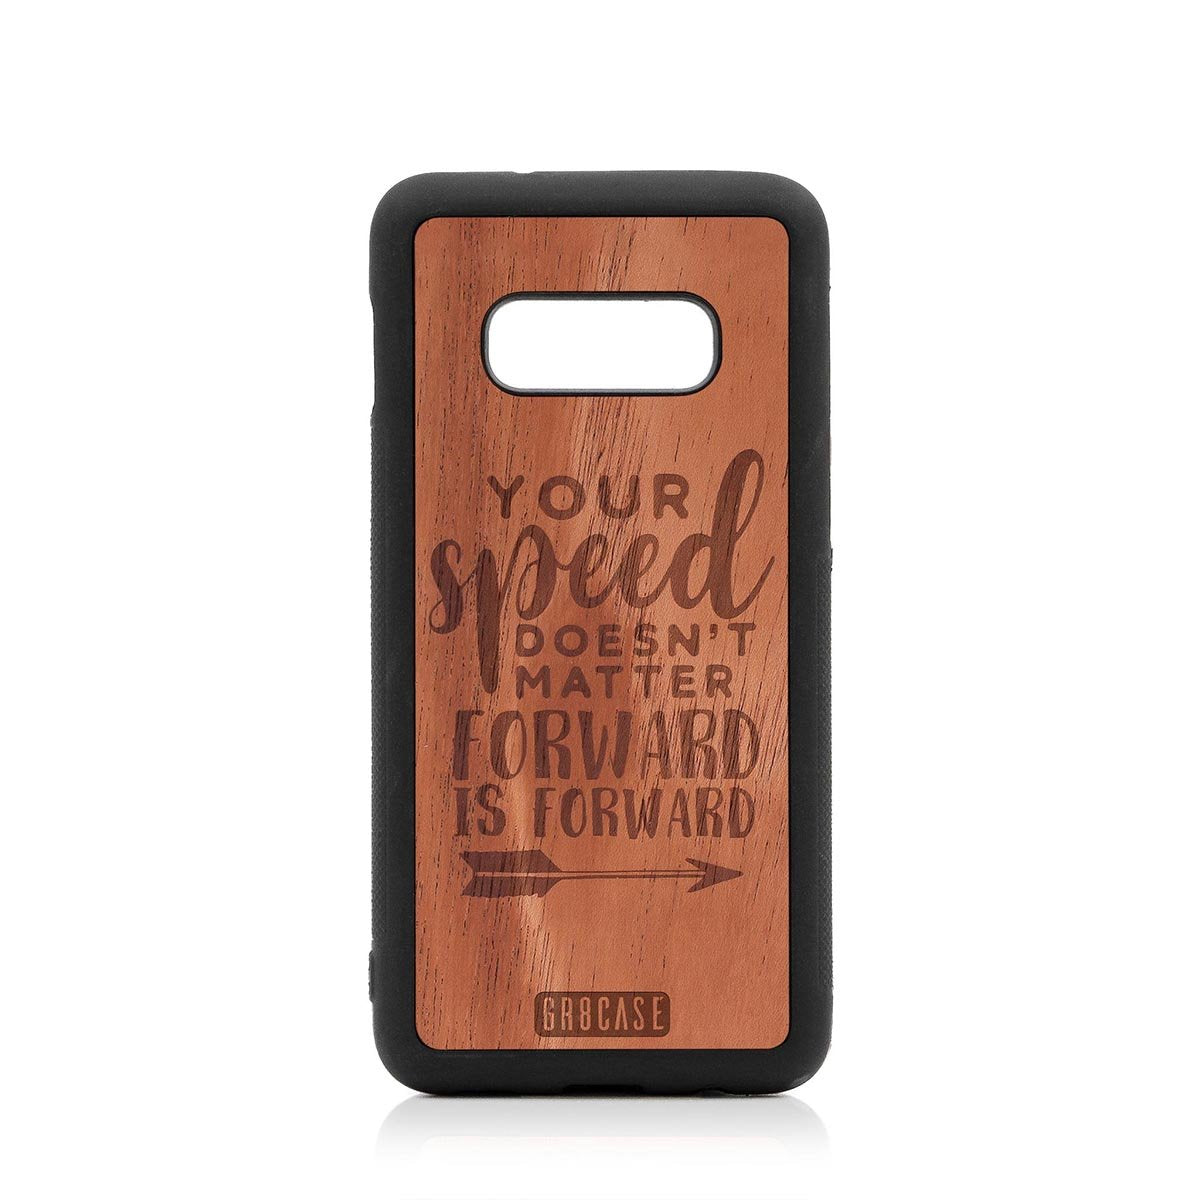 Your Speed Doesn't Matter Forward Is Forward Design Wood Case Samsung Galaxy S10E